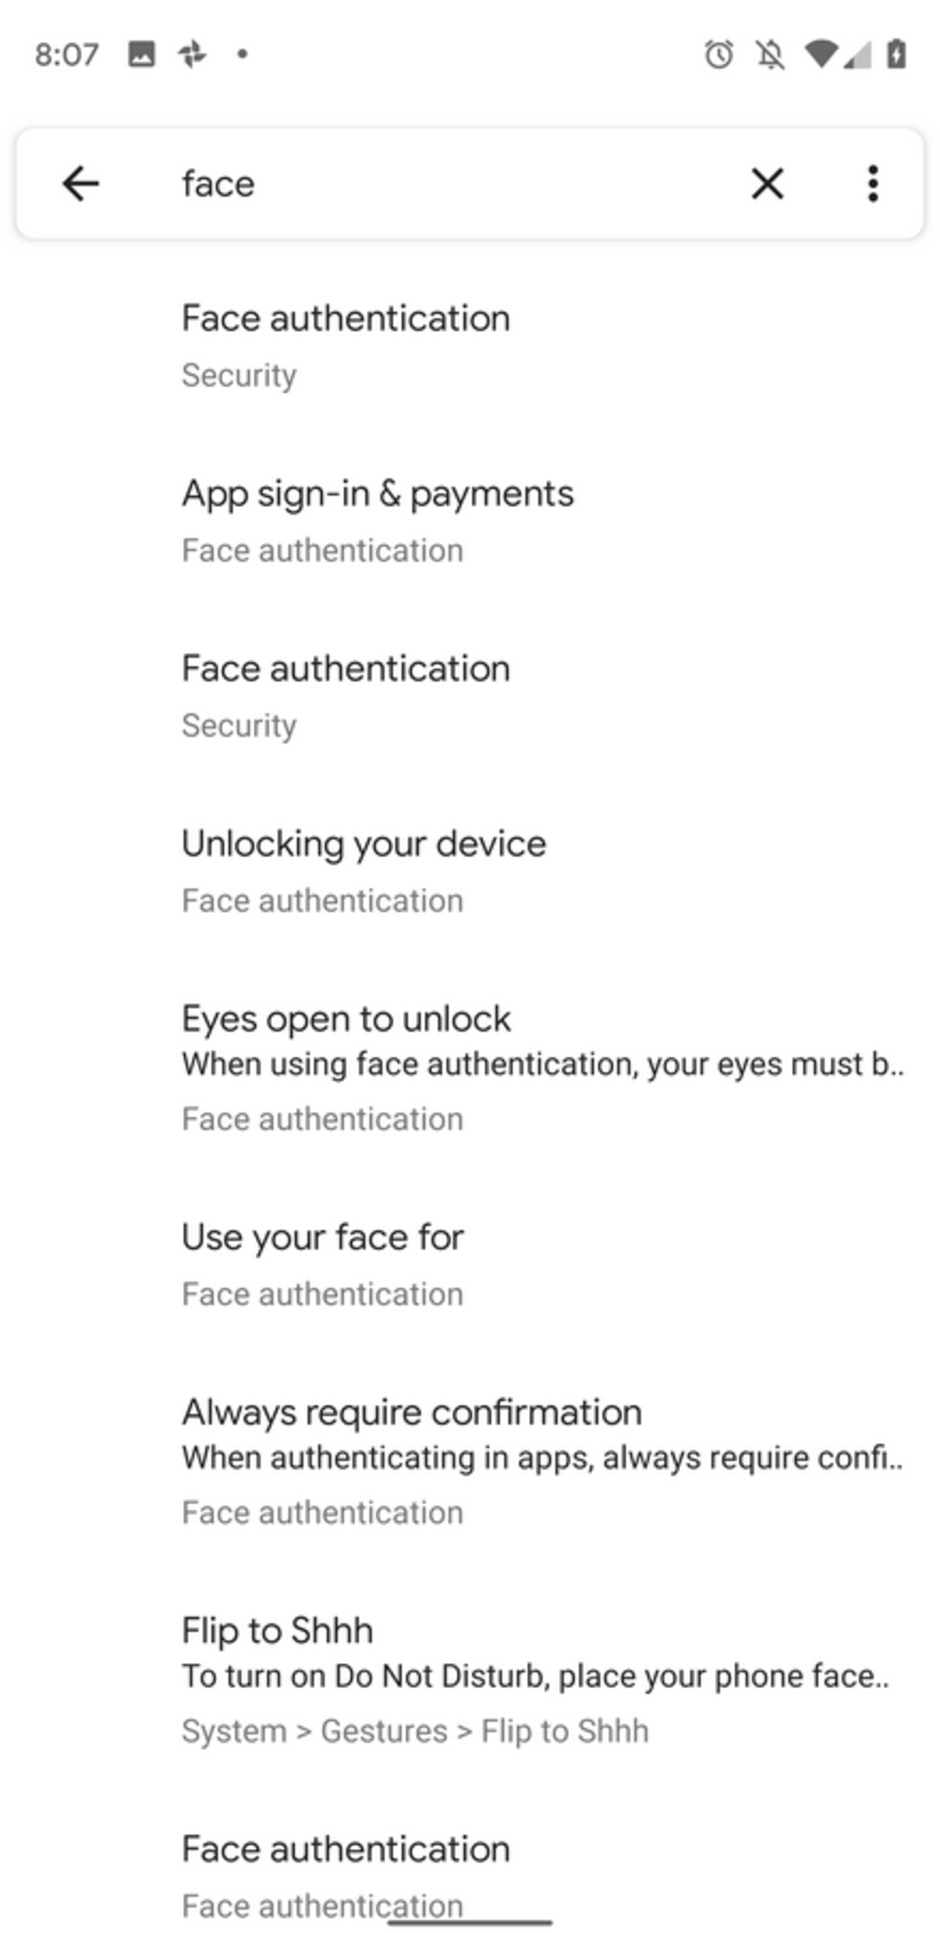 Hidden settings page for Android Q&#039;s Face authentication - Hidden &#039;Face authentication&#039; settings found in latest Android Q Beta